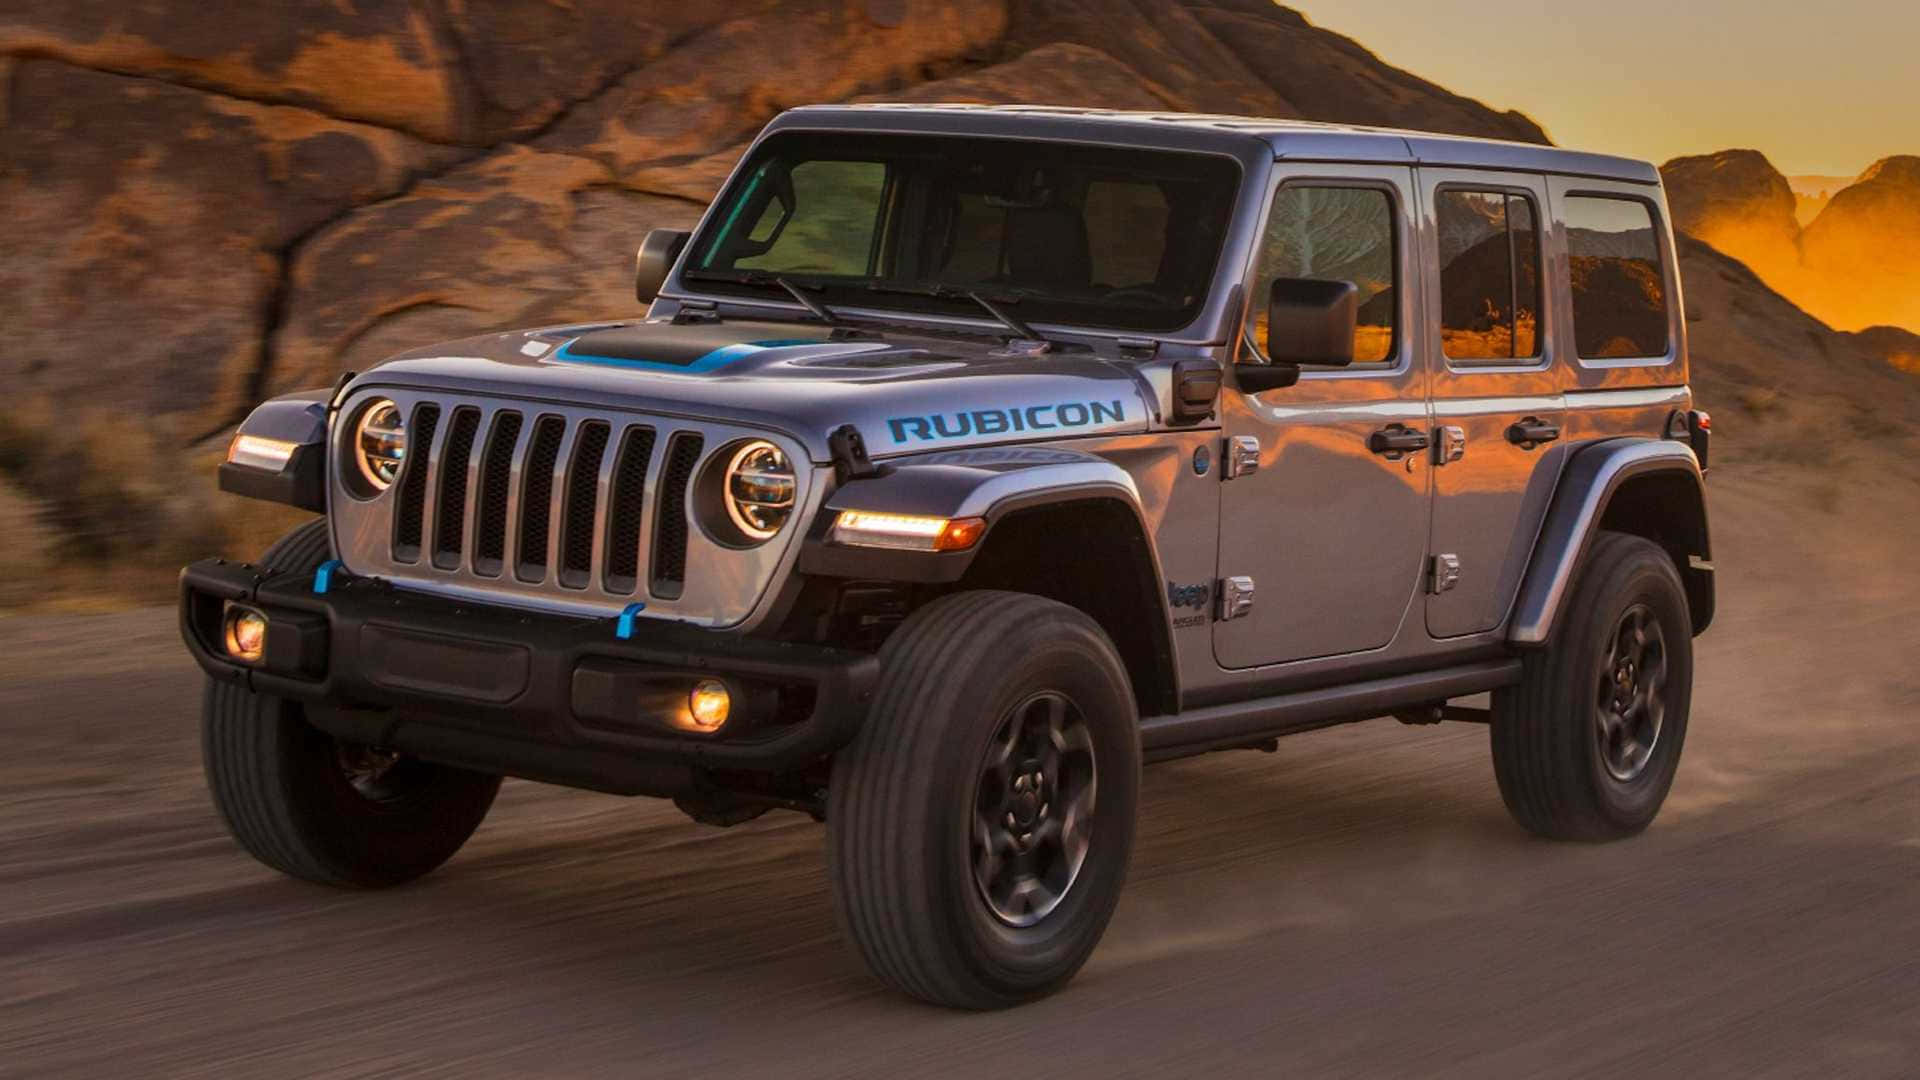 The 2020 Jeep Wrangler Is Driving Down A Desert Road